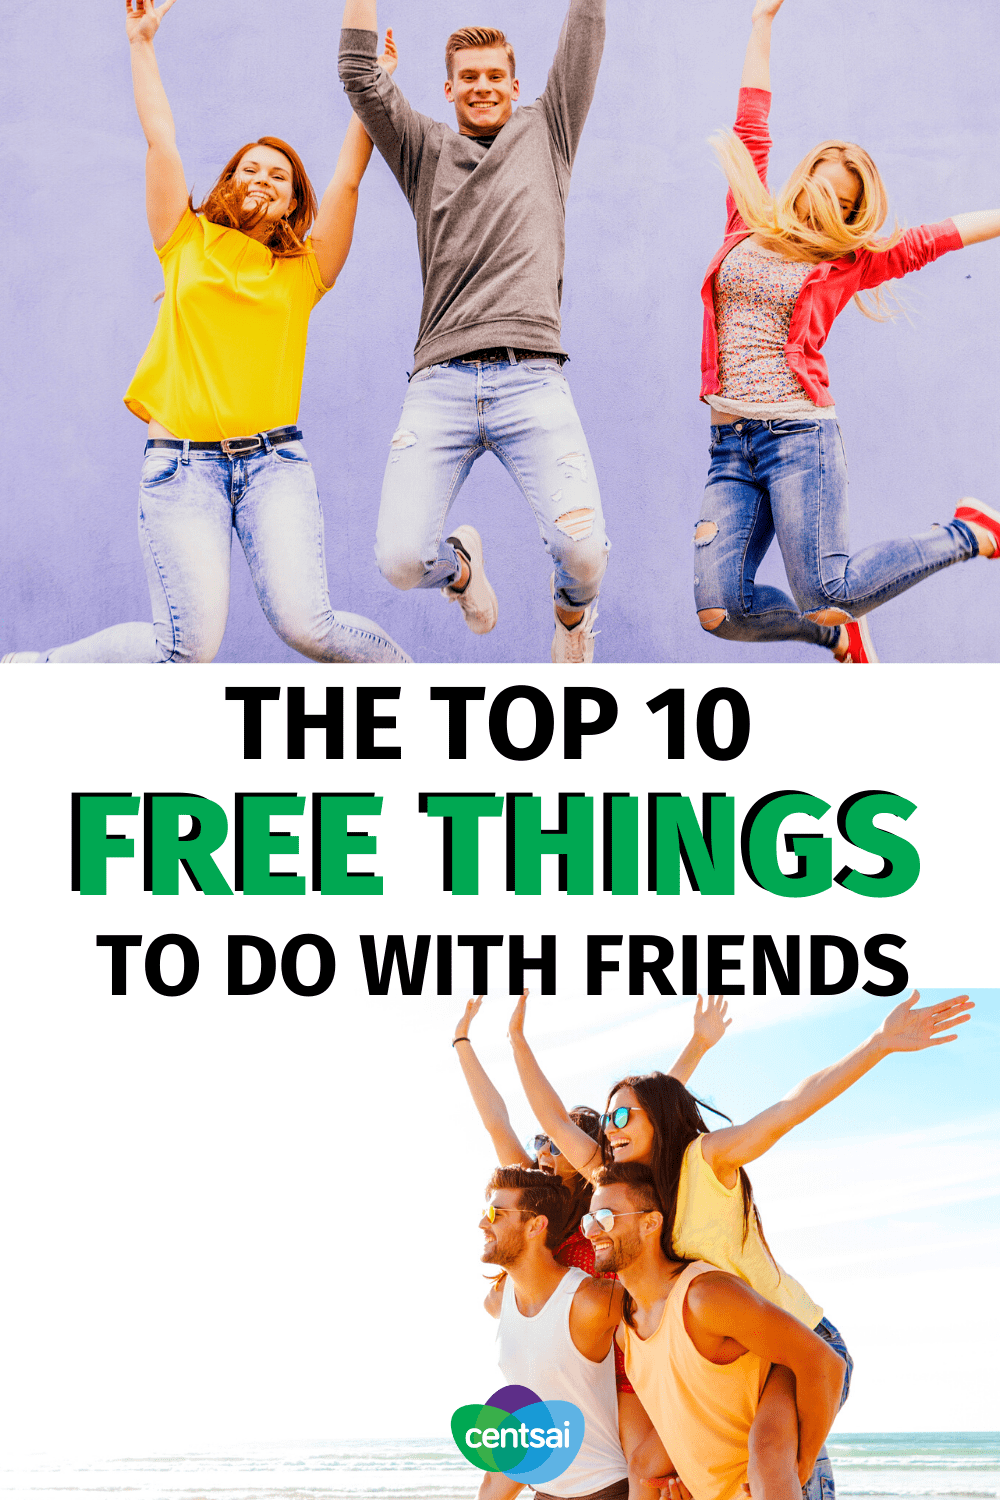 The Top 10 FREE Things to Do with Friends